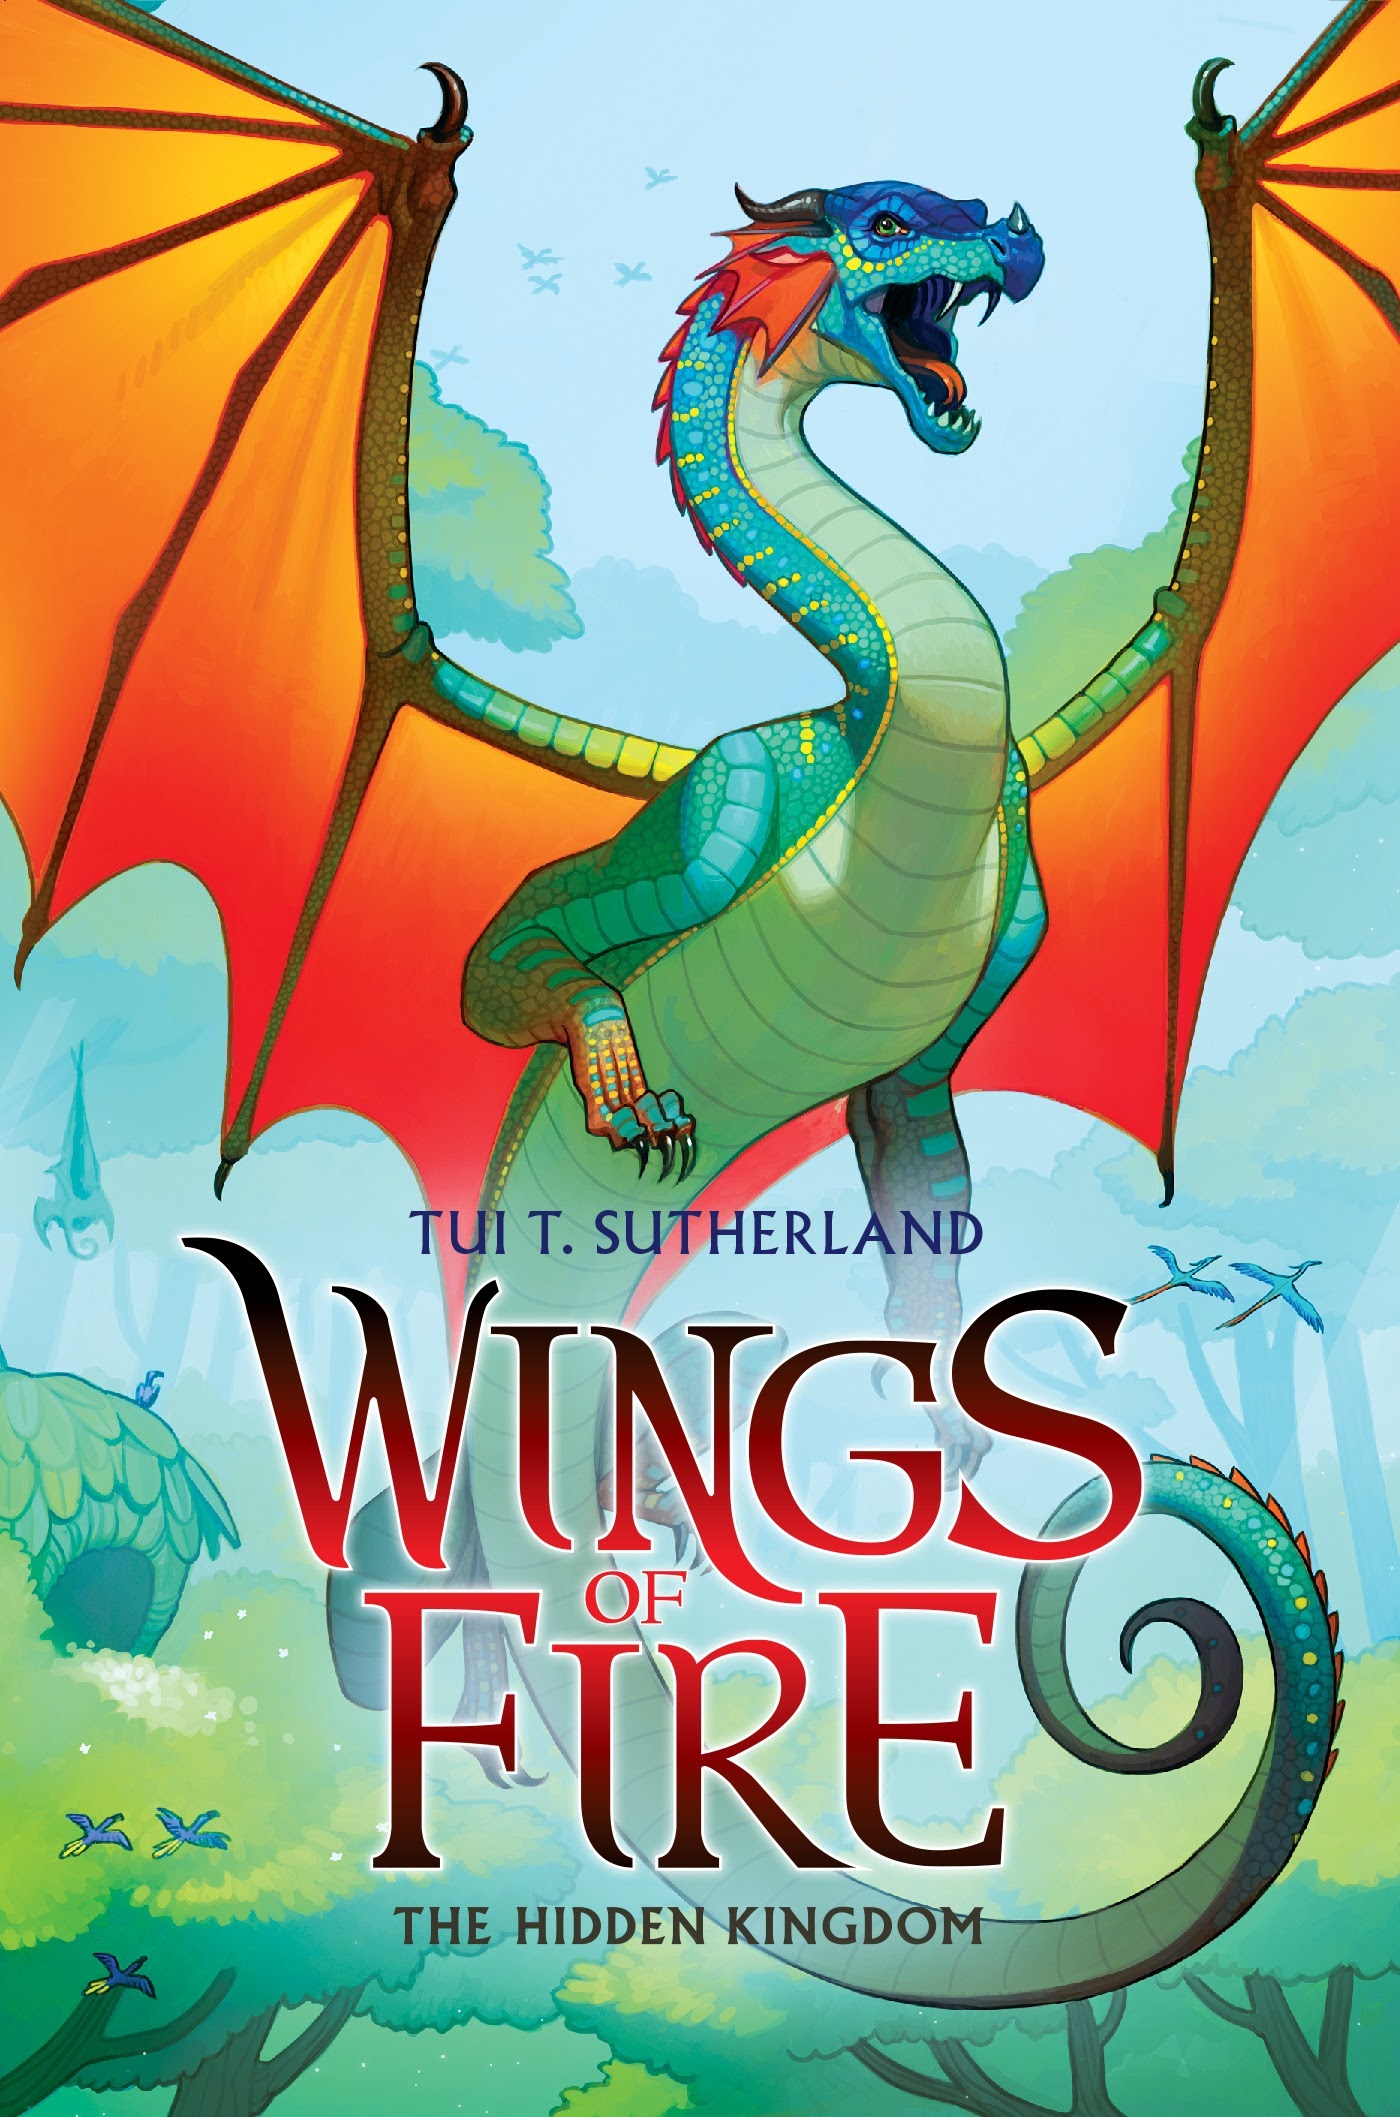 how many copies of wings of fire books are there